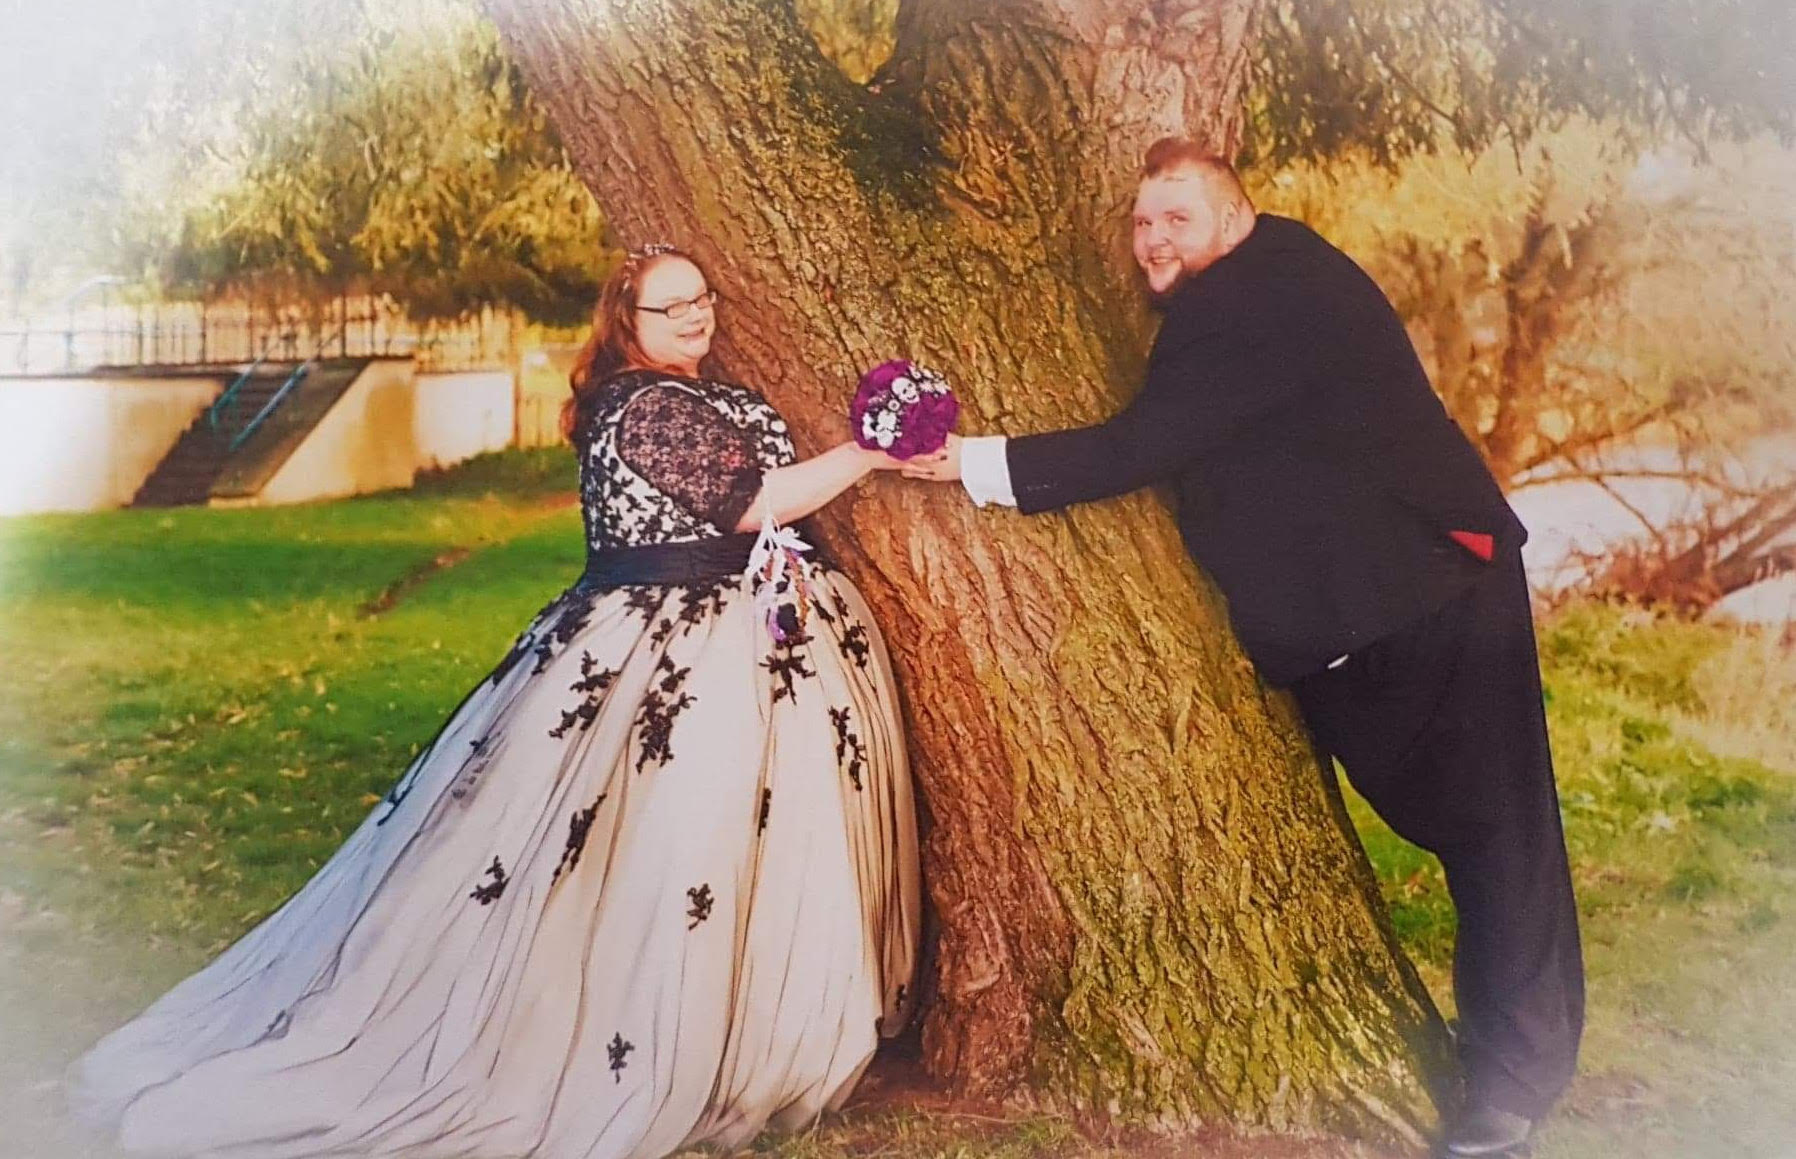 Kirsty wears a white and black wedding dress, with Chris in a black suit as they hold hands around a tree.